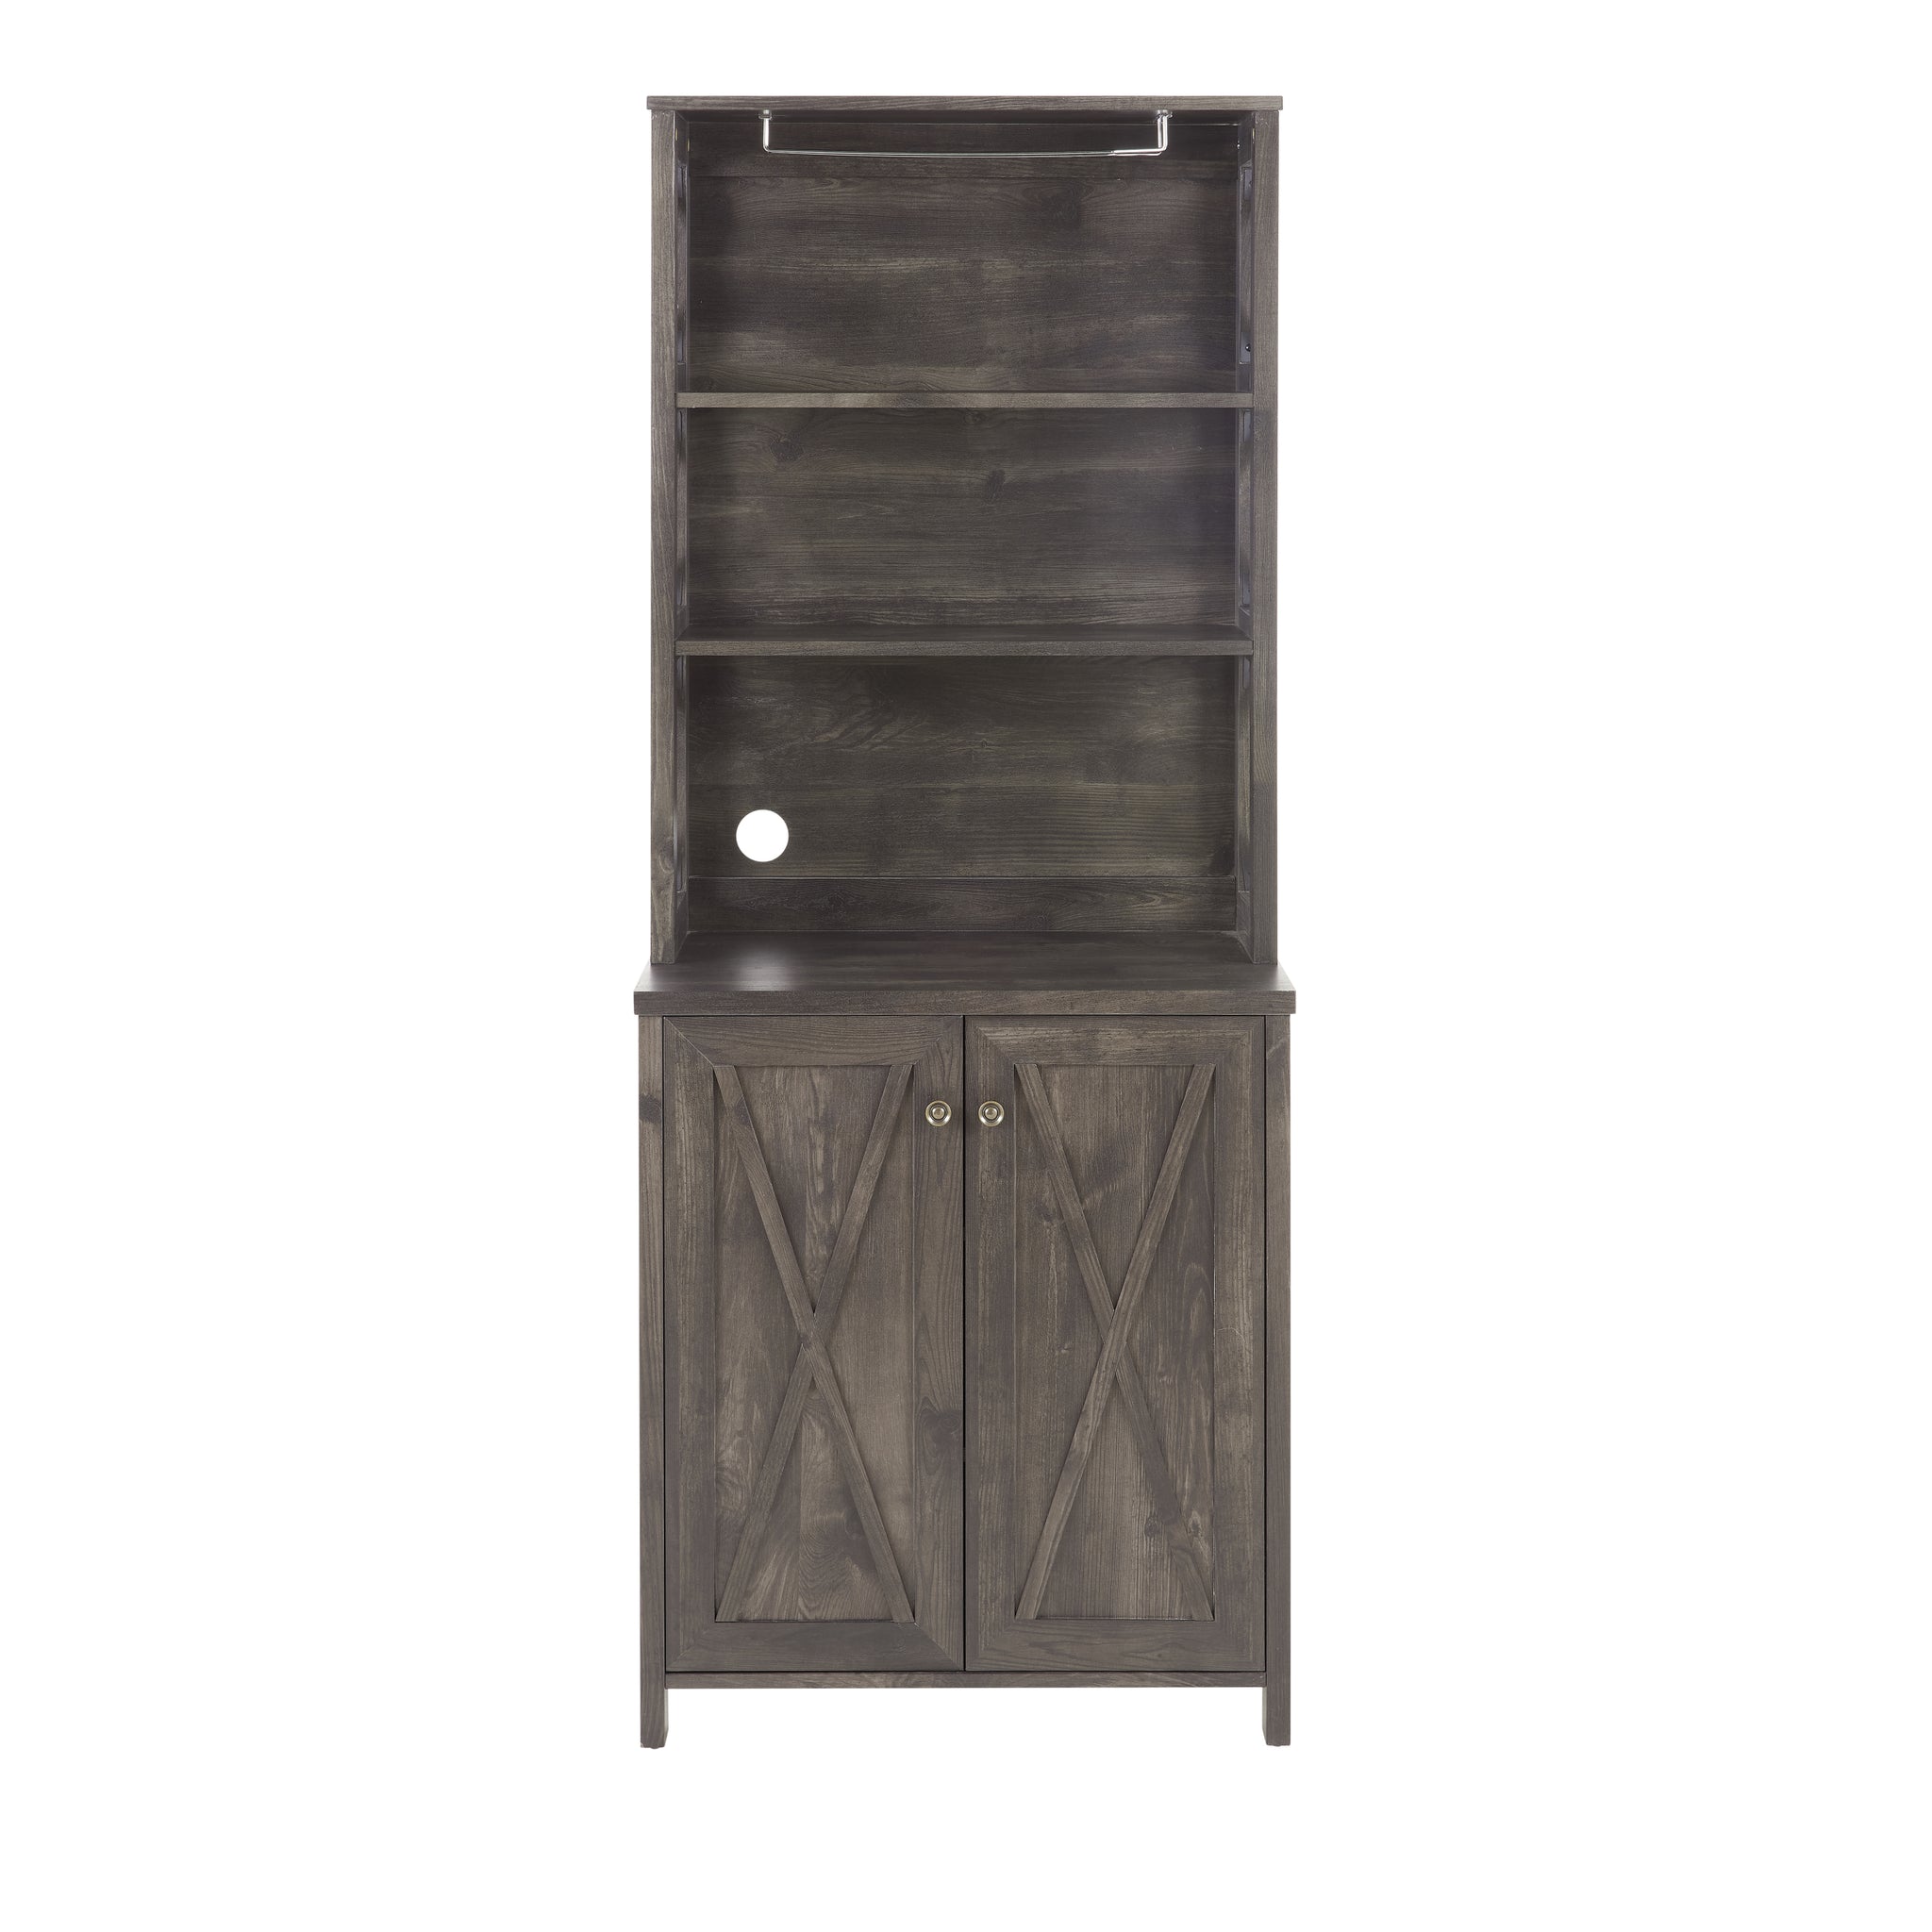 Coffee Bar Cabinet Kitchen Cabinet with Microwave charcoal grey-cabinets included-mdf